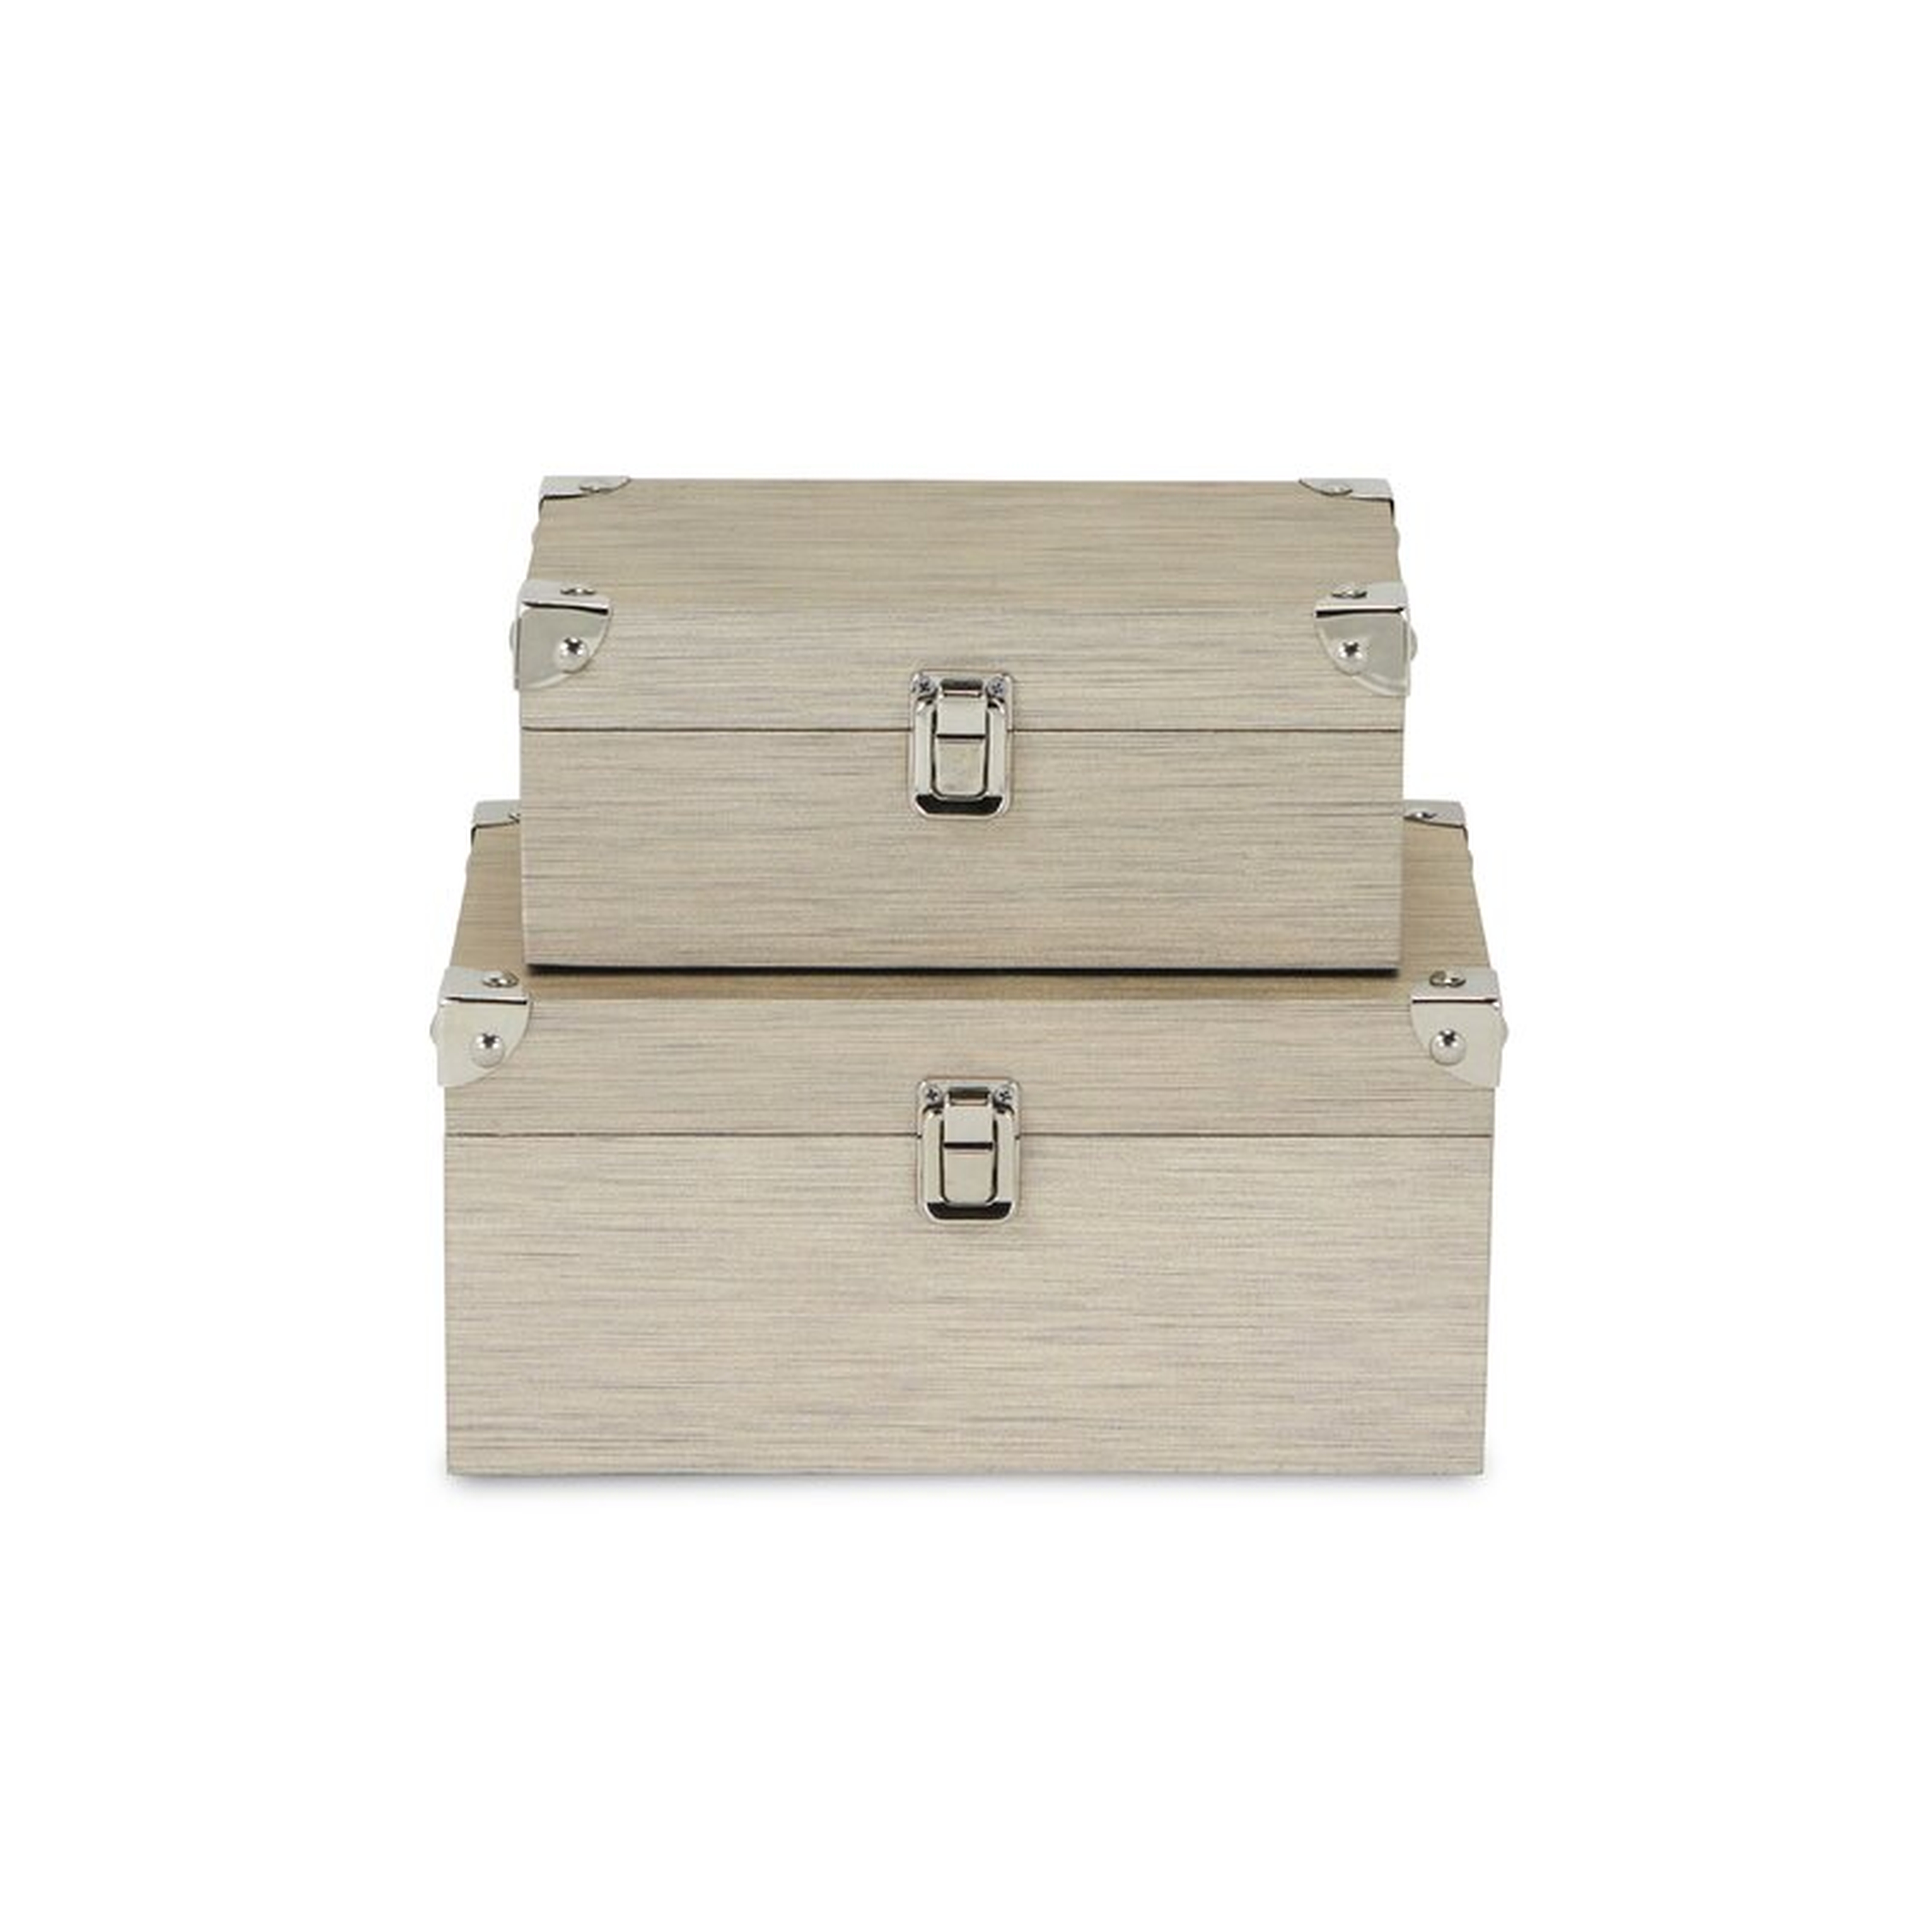 Shimmery Wood 2 Piece Box Set with Chrome Corner Accent - Wayfair